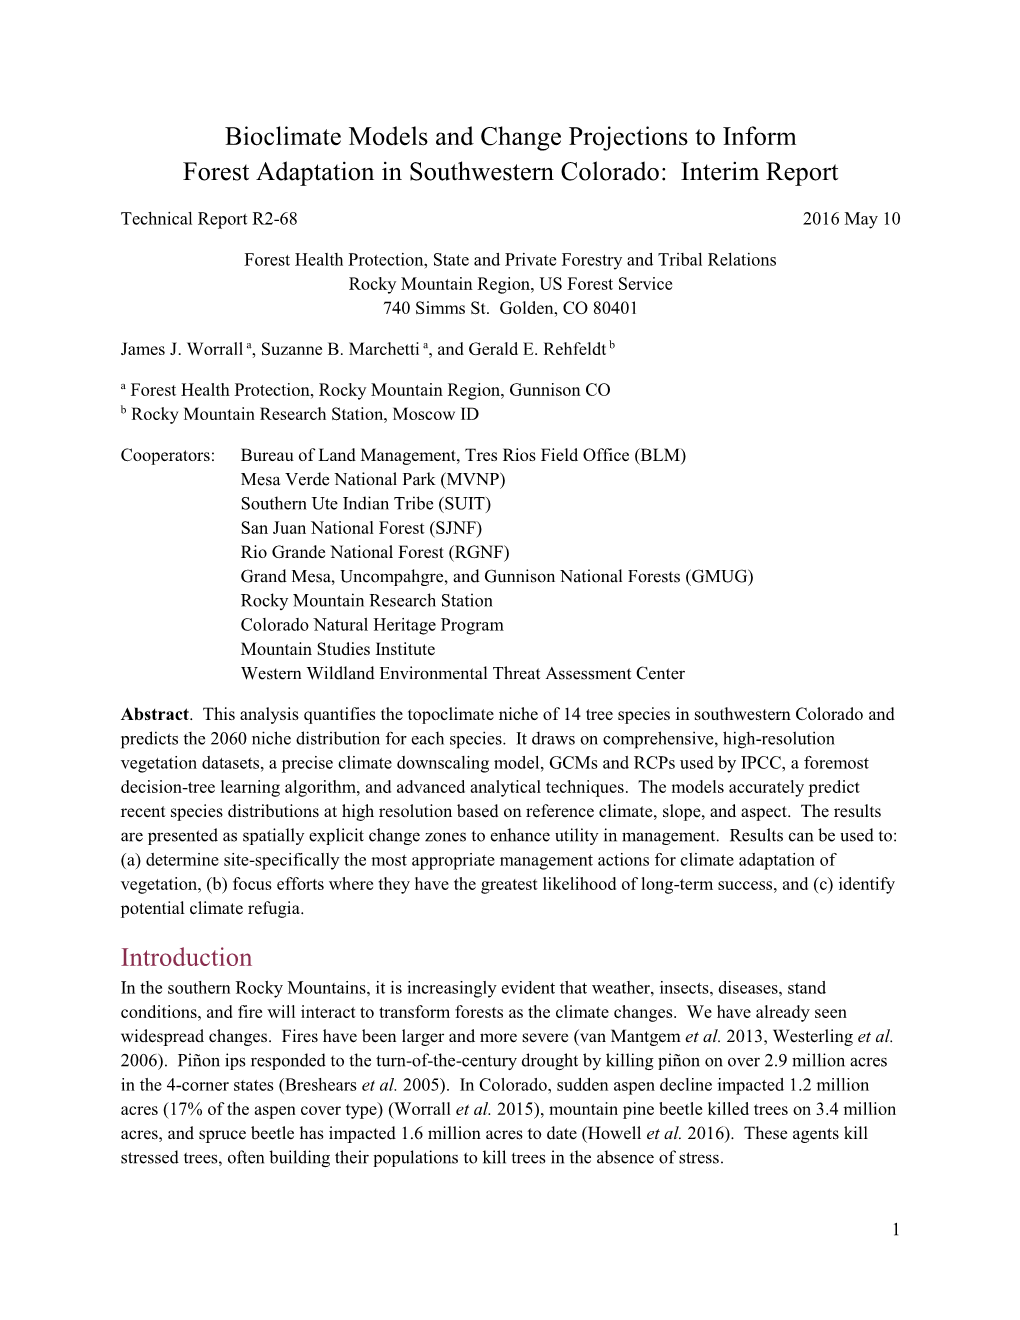 Bioclimate Models and Change Projections to Inform Forest Adaptation in Southwestern Colorado: Interim Report